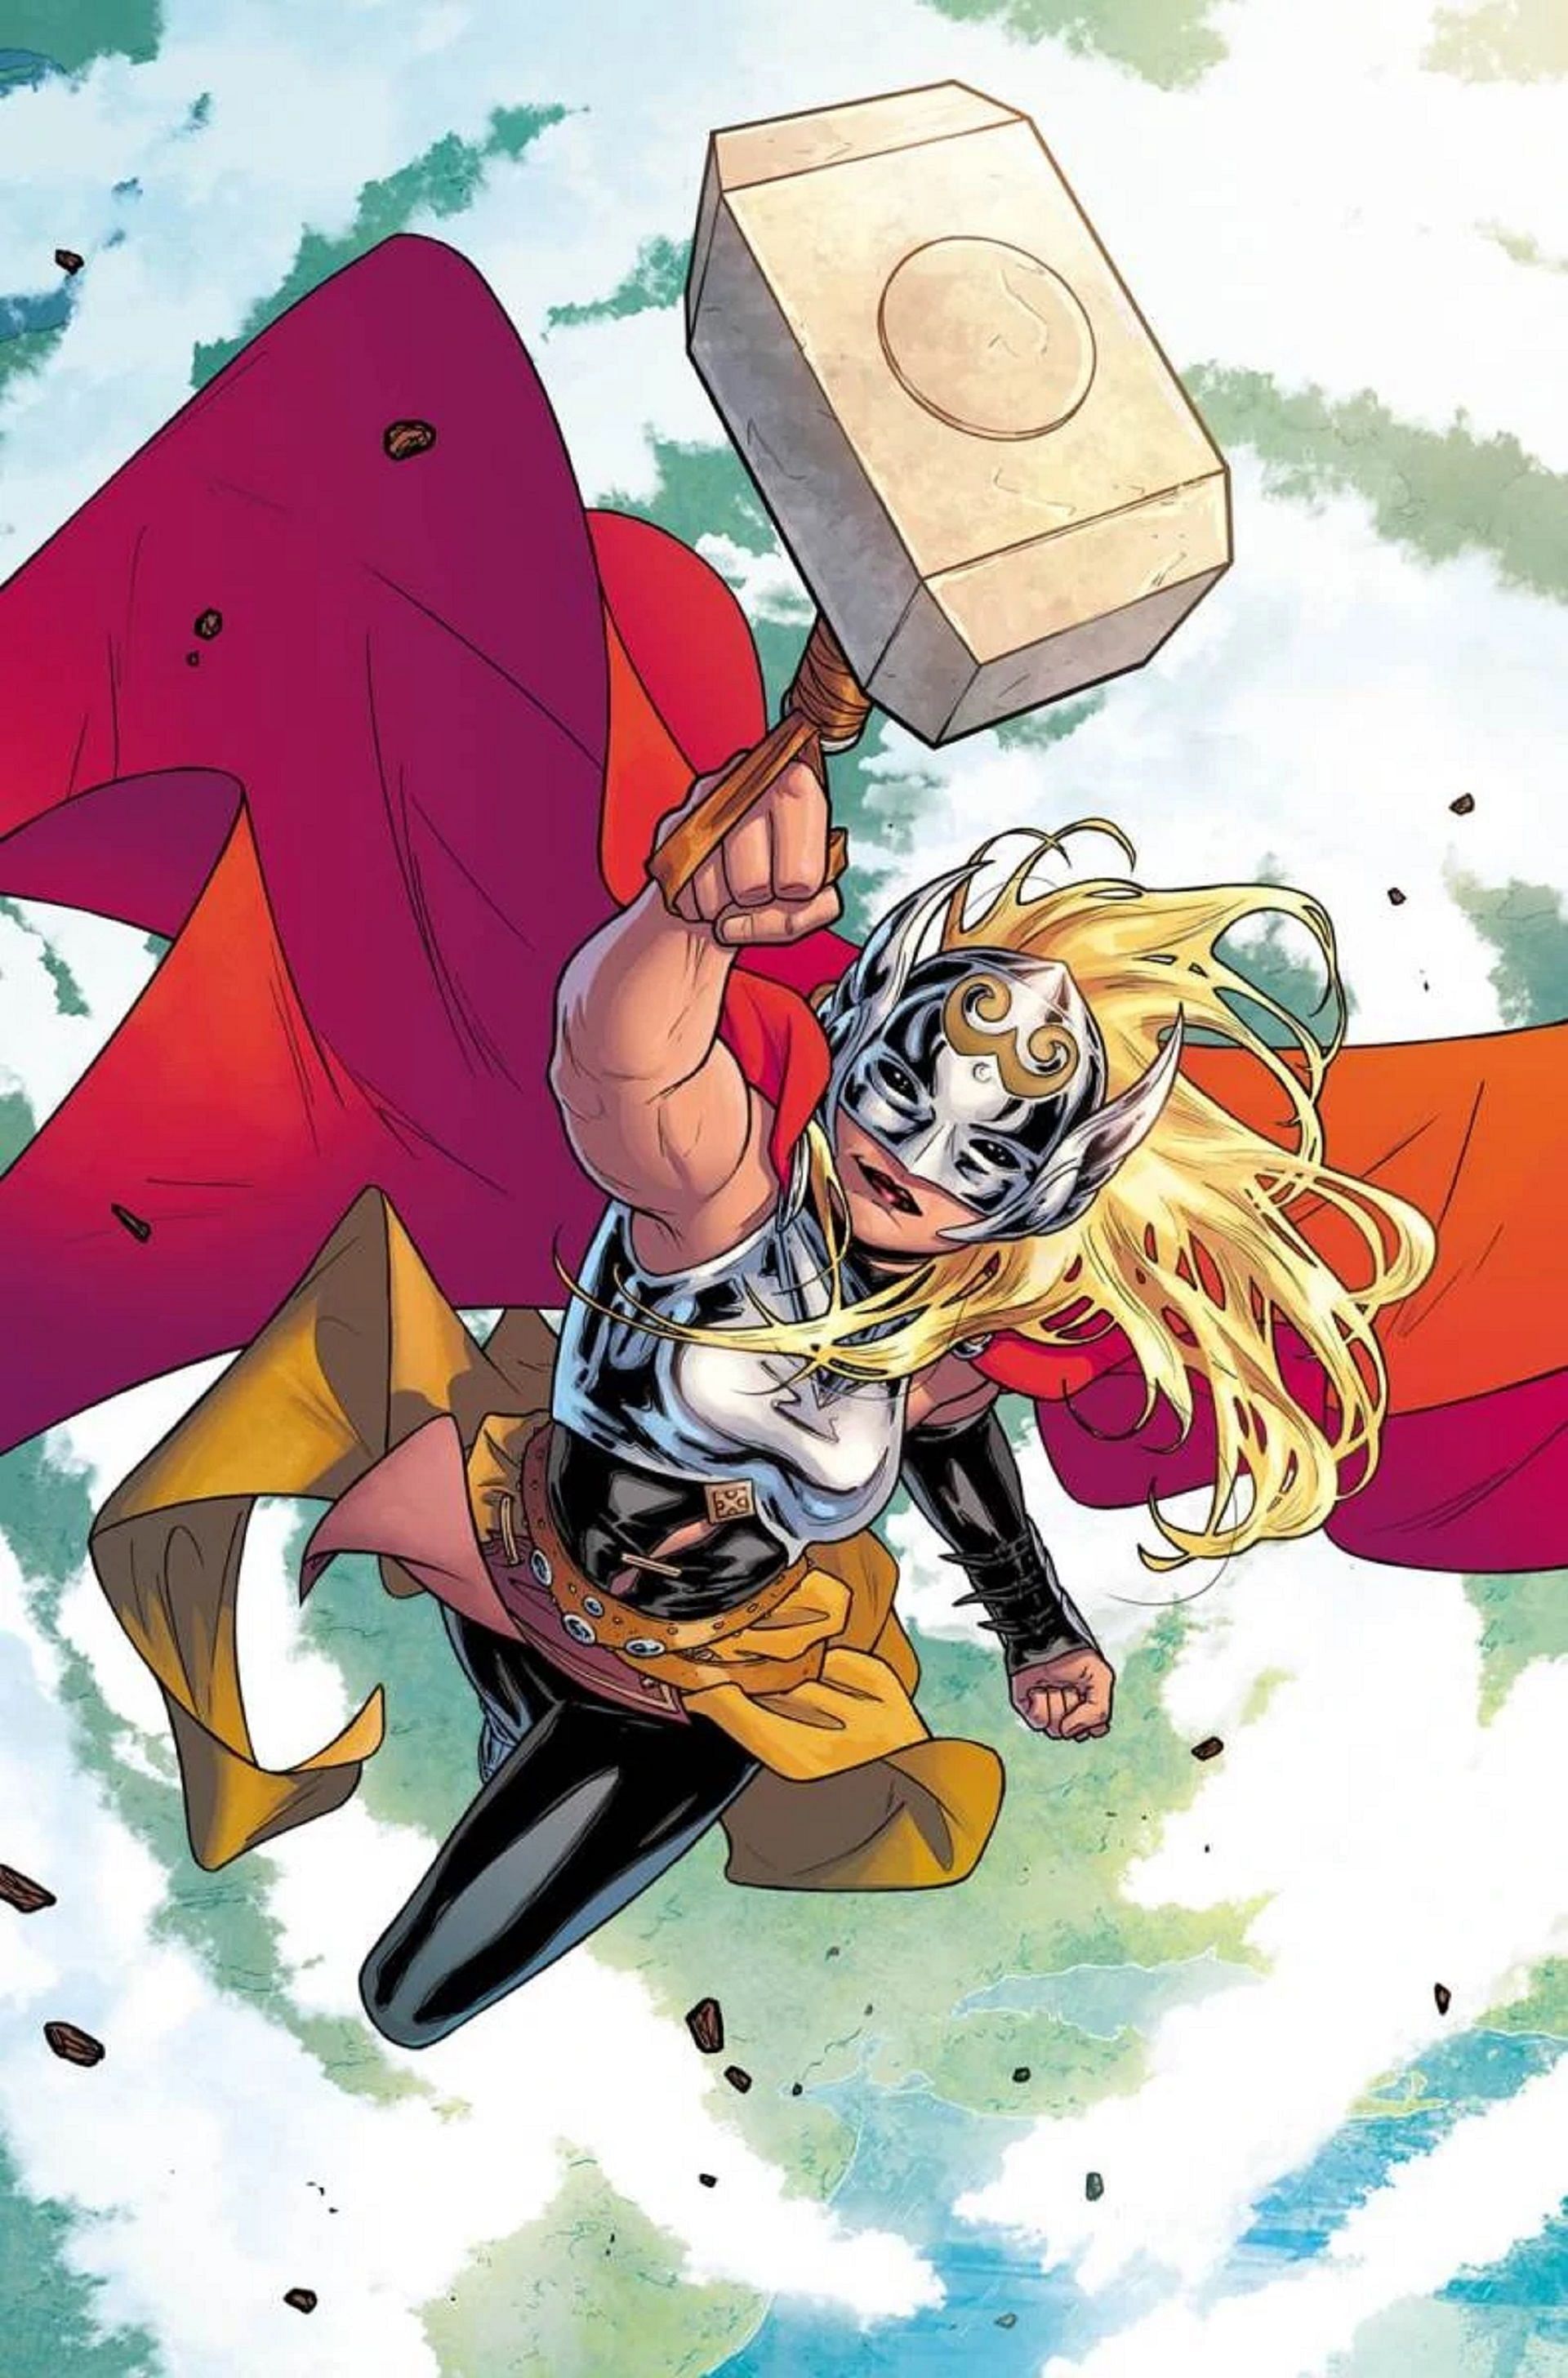 Jane Foster becomes Lady Thor in Comics (Image via Marvel)